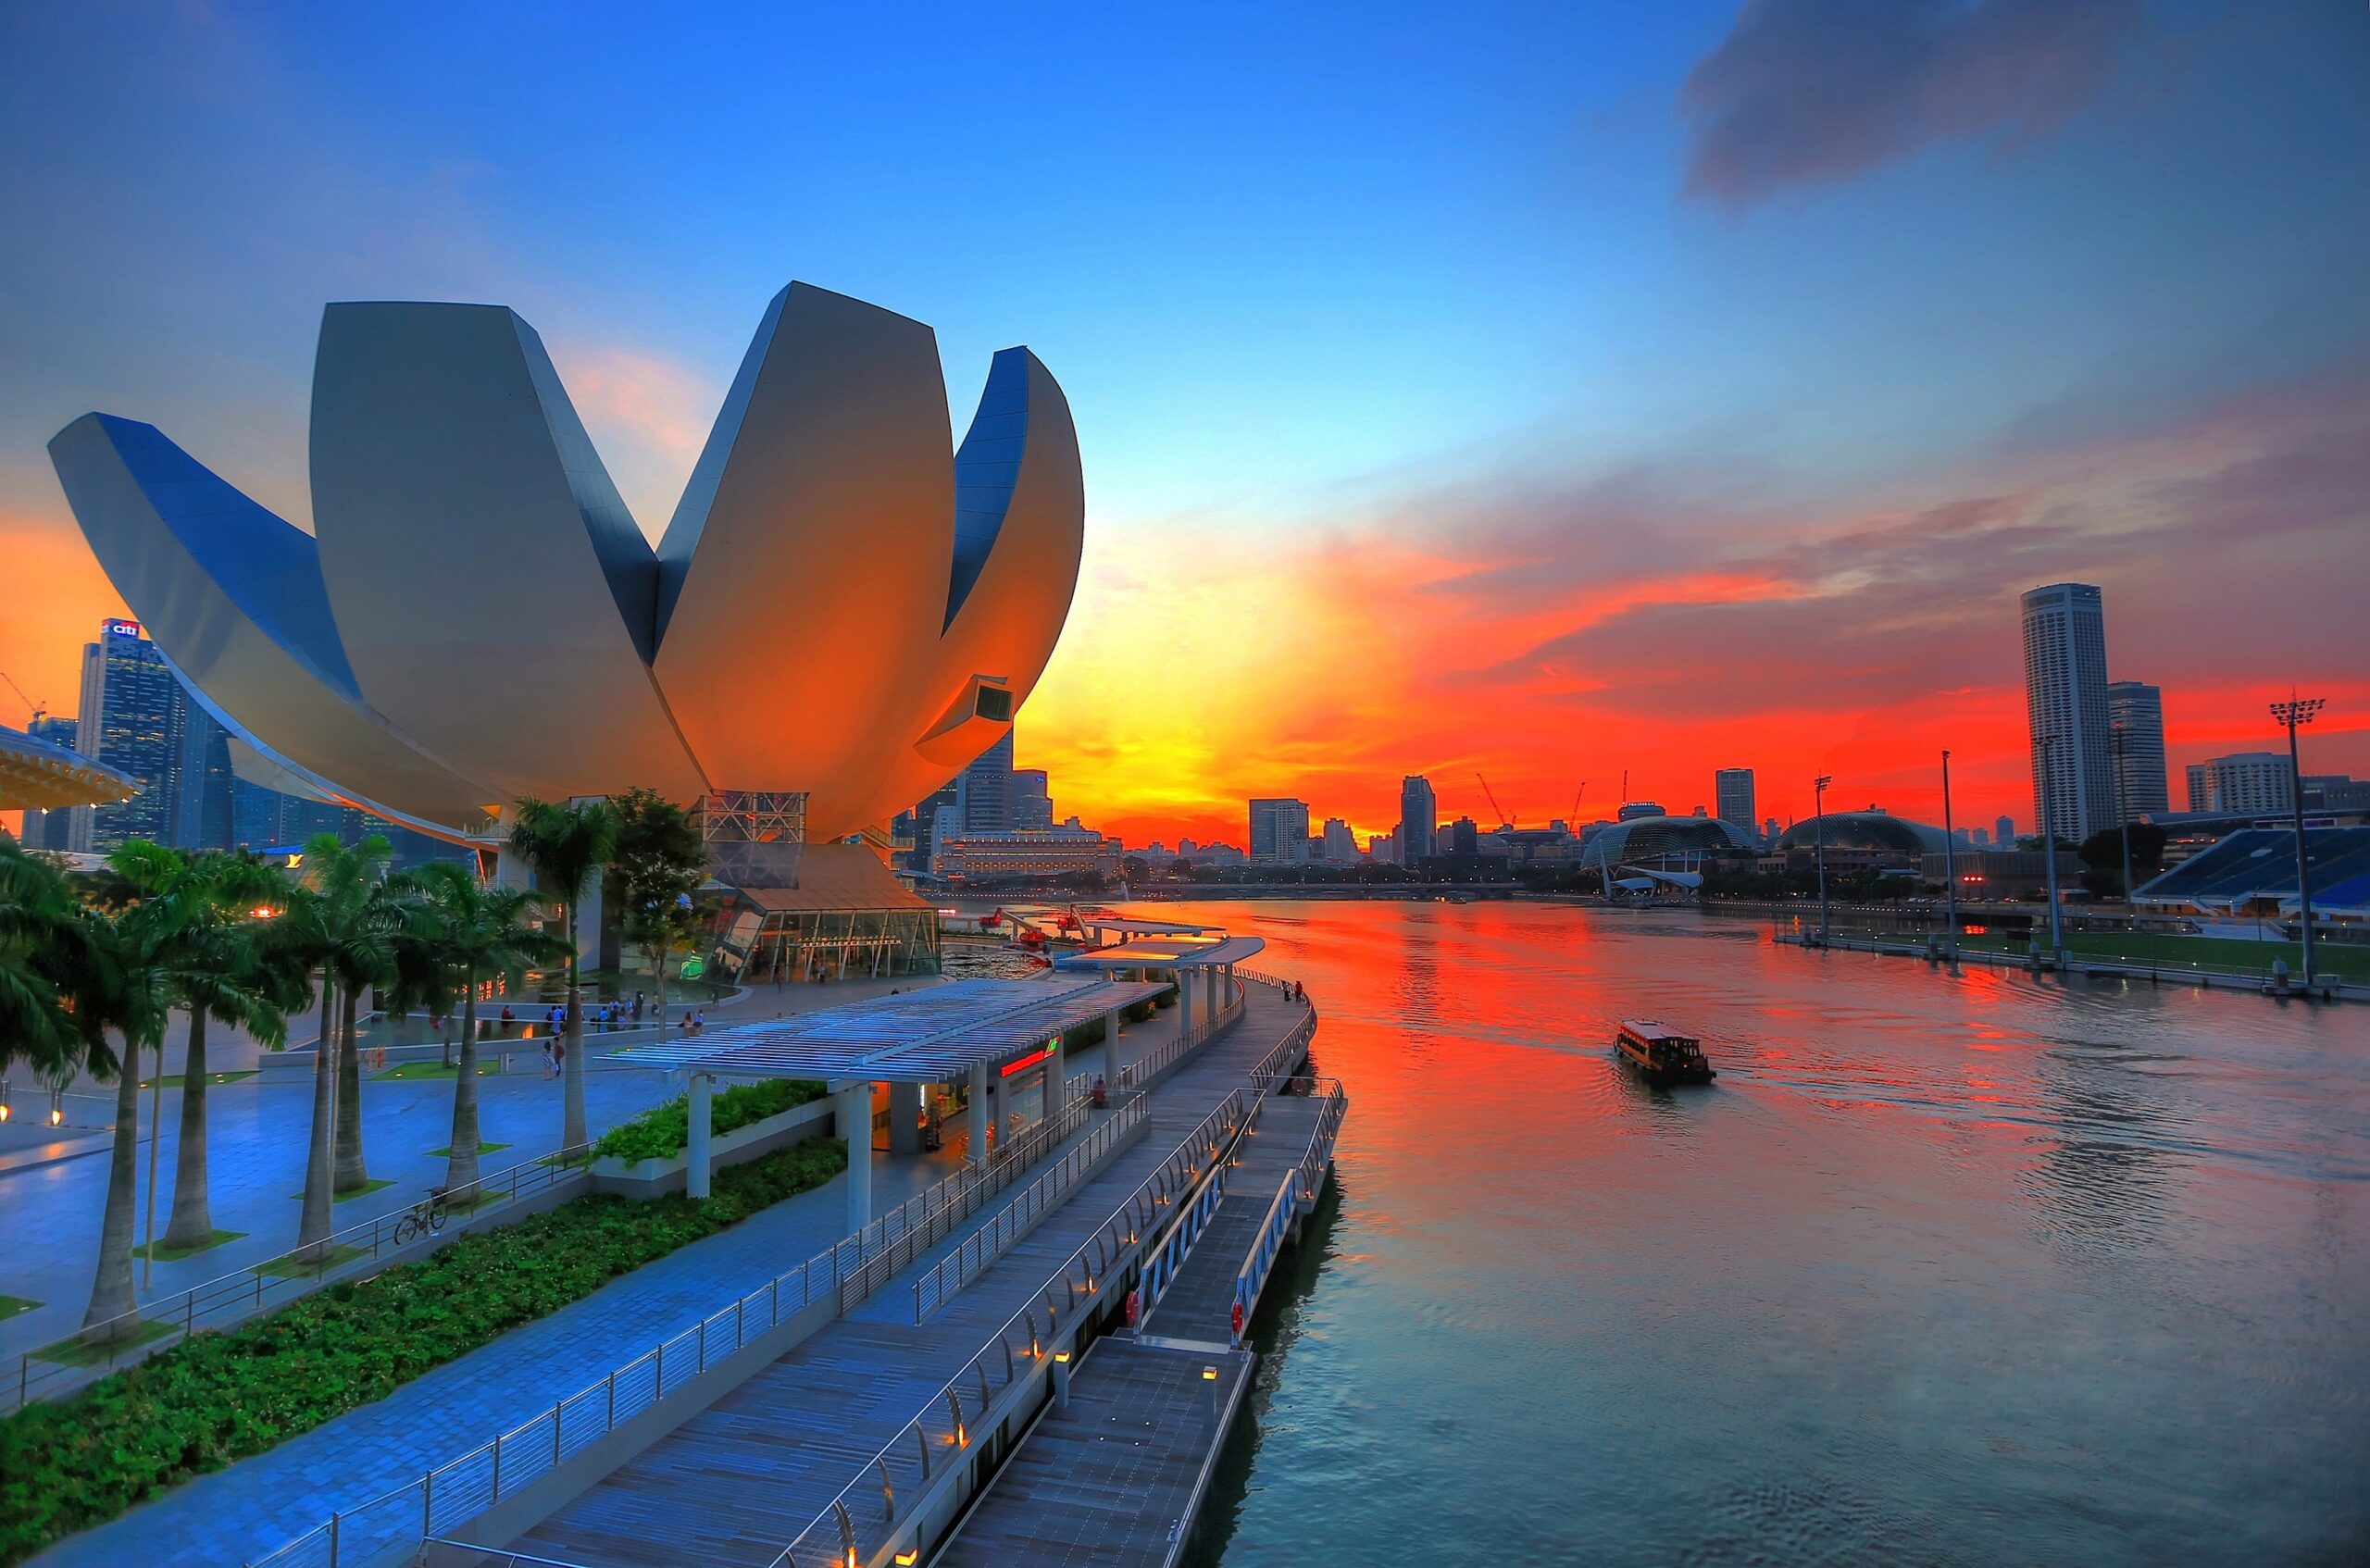 Cultural and Artistic Destinations for Families in Singapore